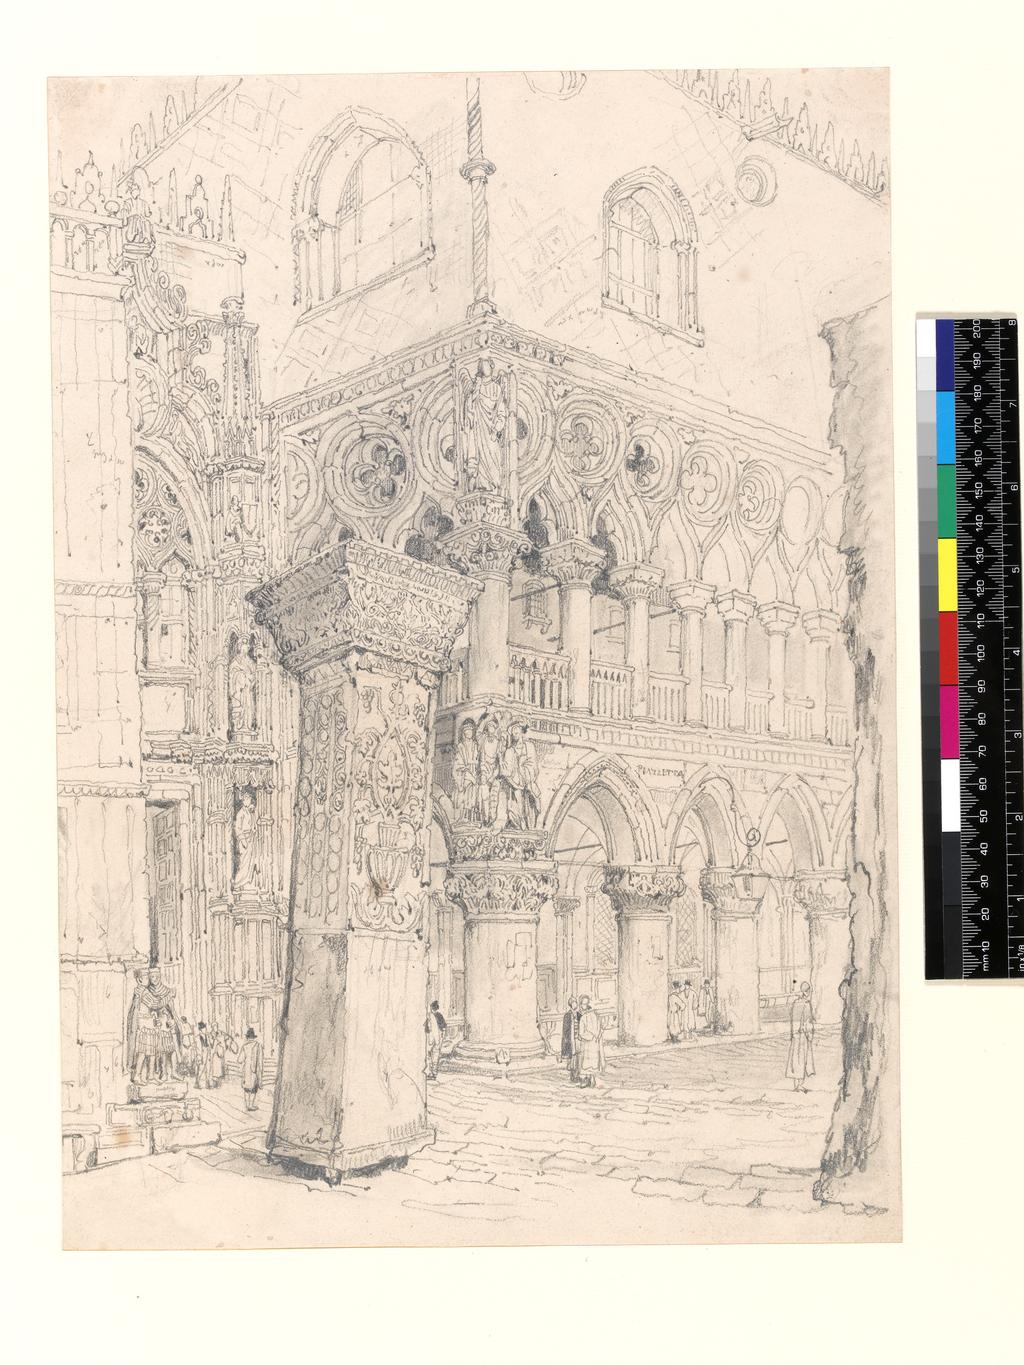 An image of Prout, Samuel (British). The Piazzetta, Venice. Graphite on paper, laid down on mounting card, 362 mm x 259 mm, 19th Century.